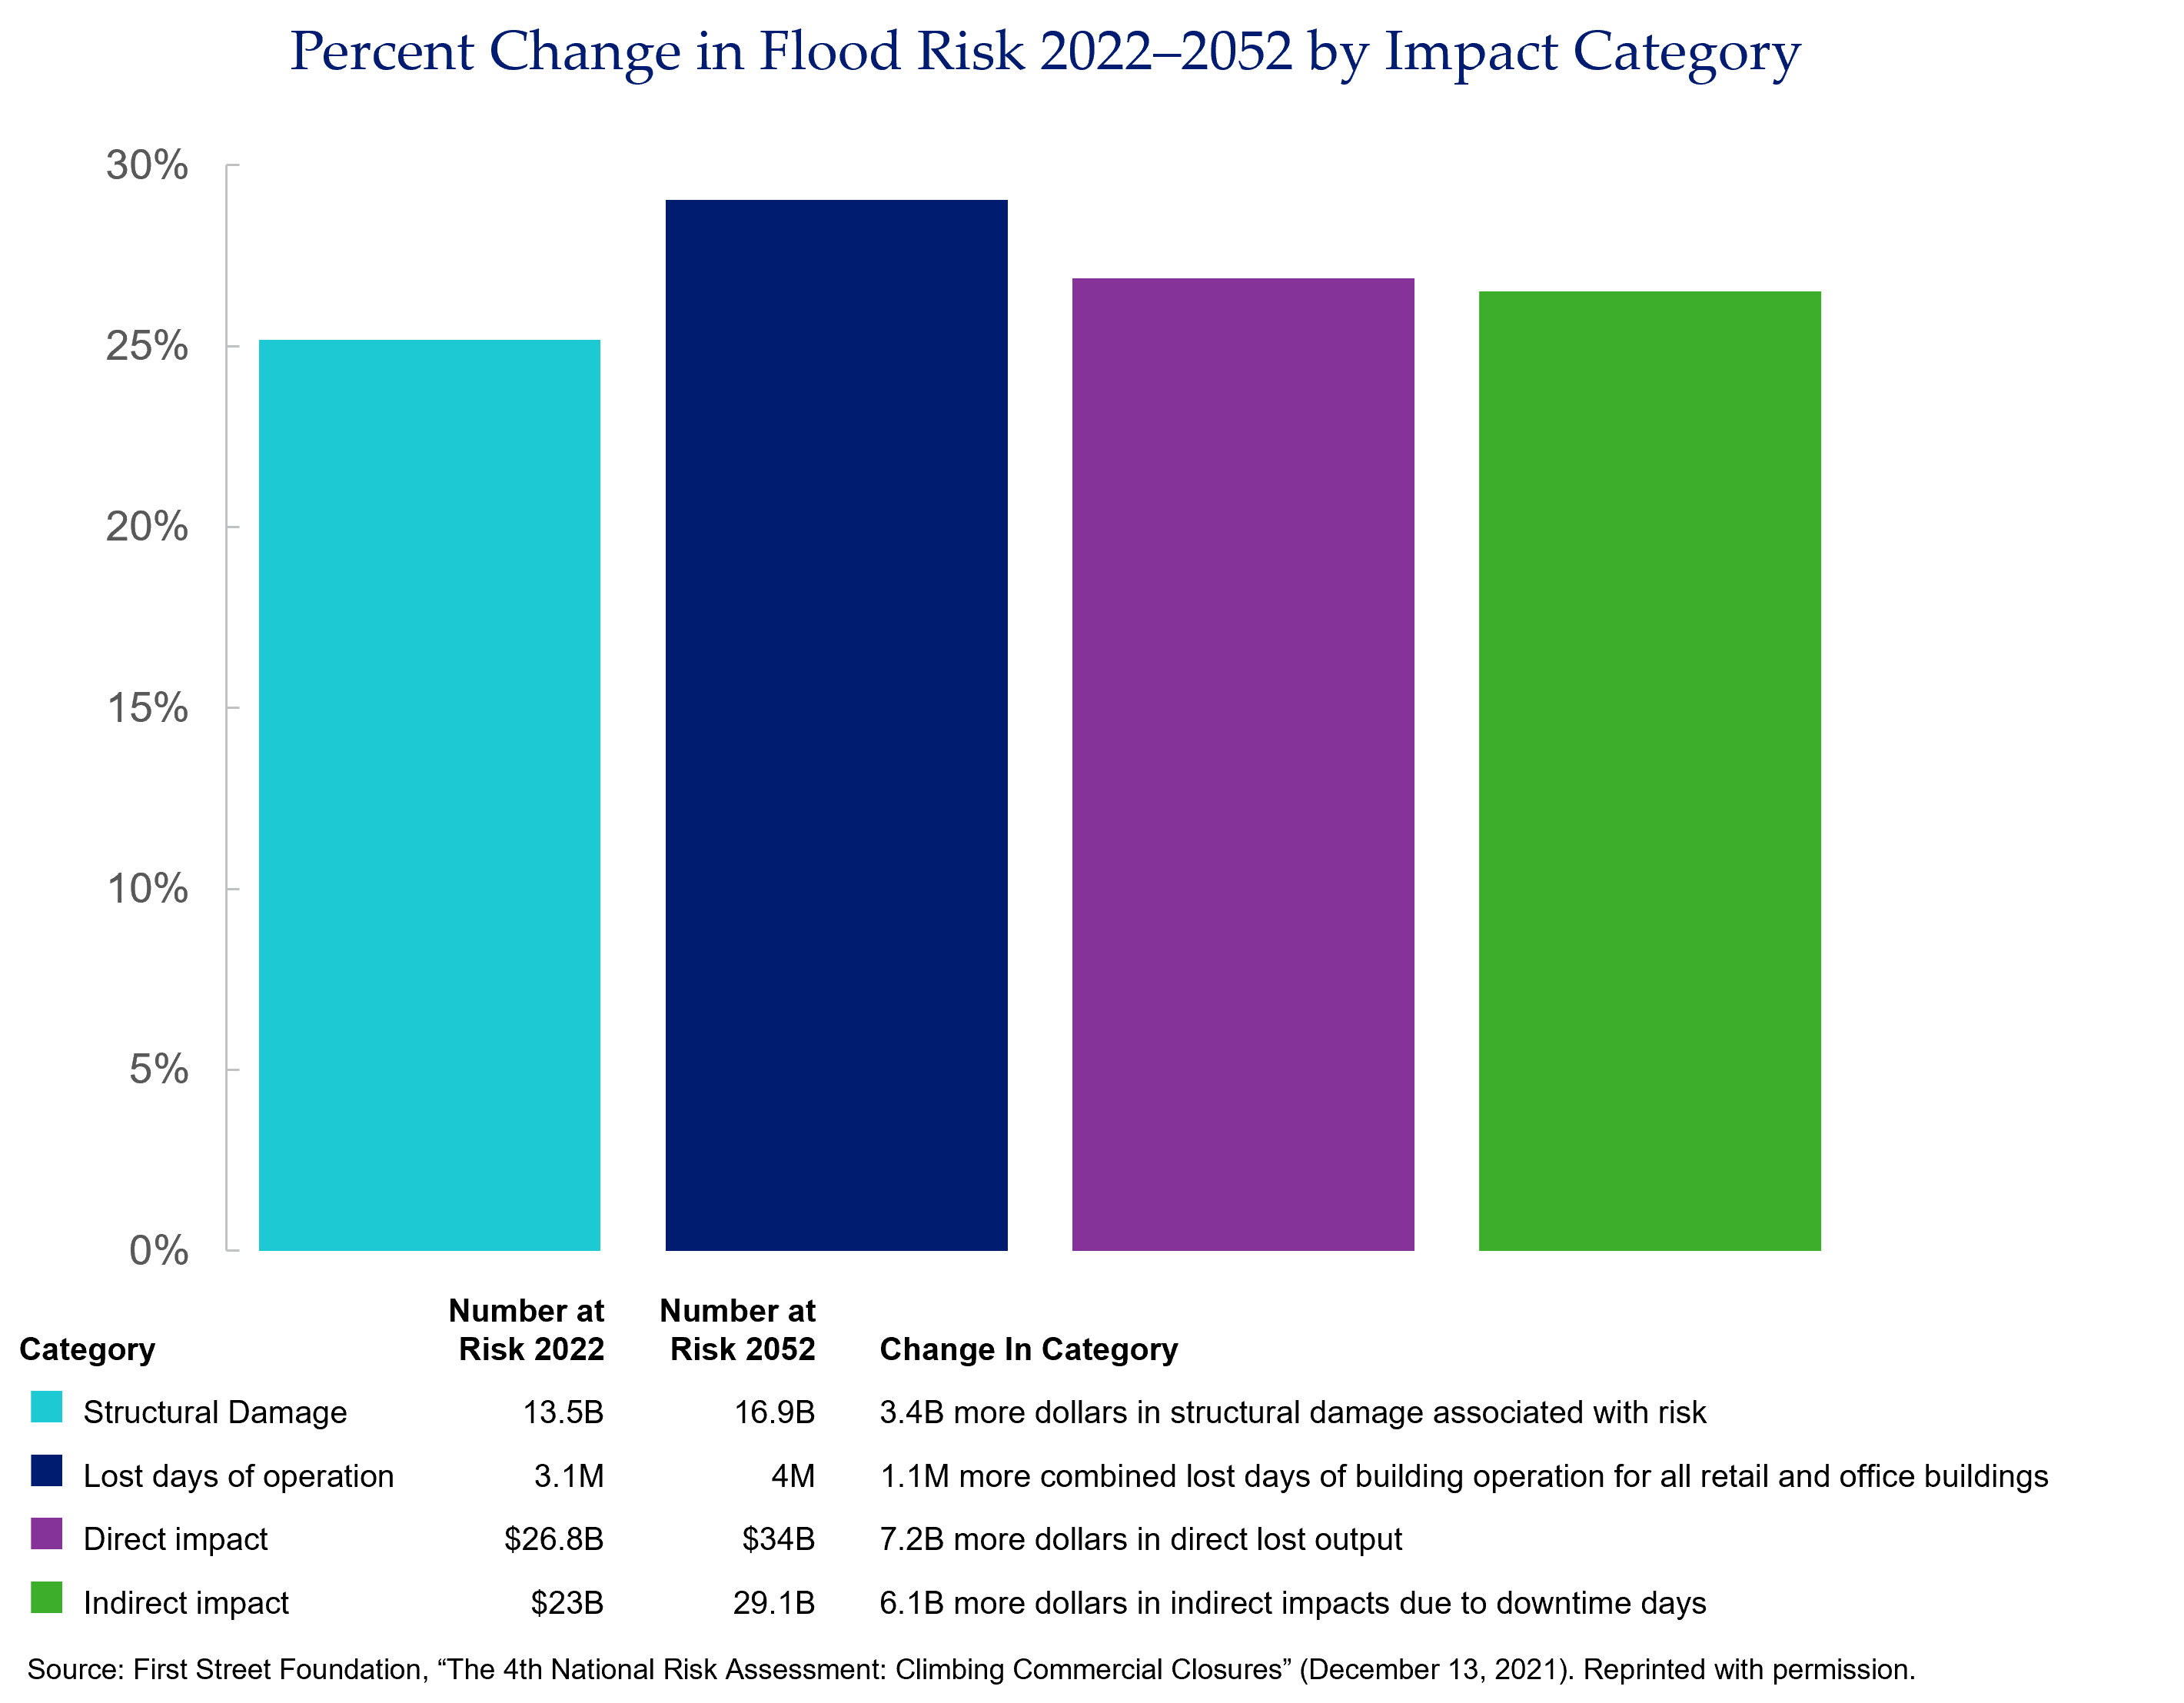 Percentage Change in Flood Risk 2022-2052 by Impact Category